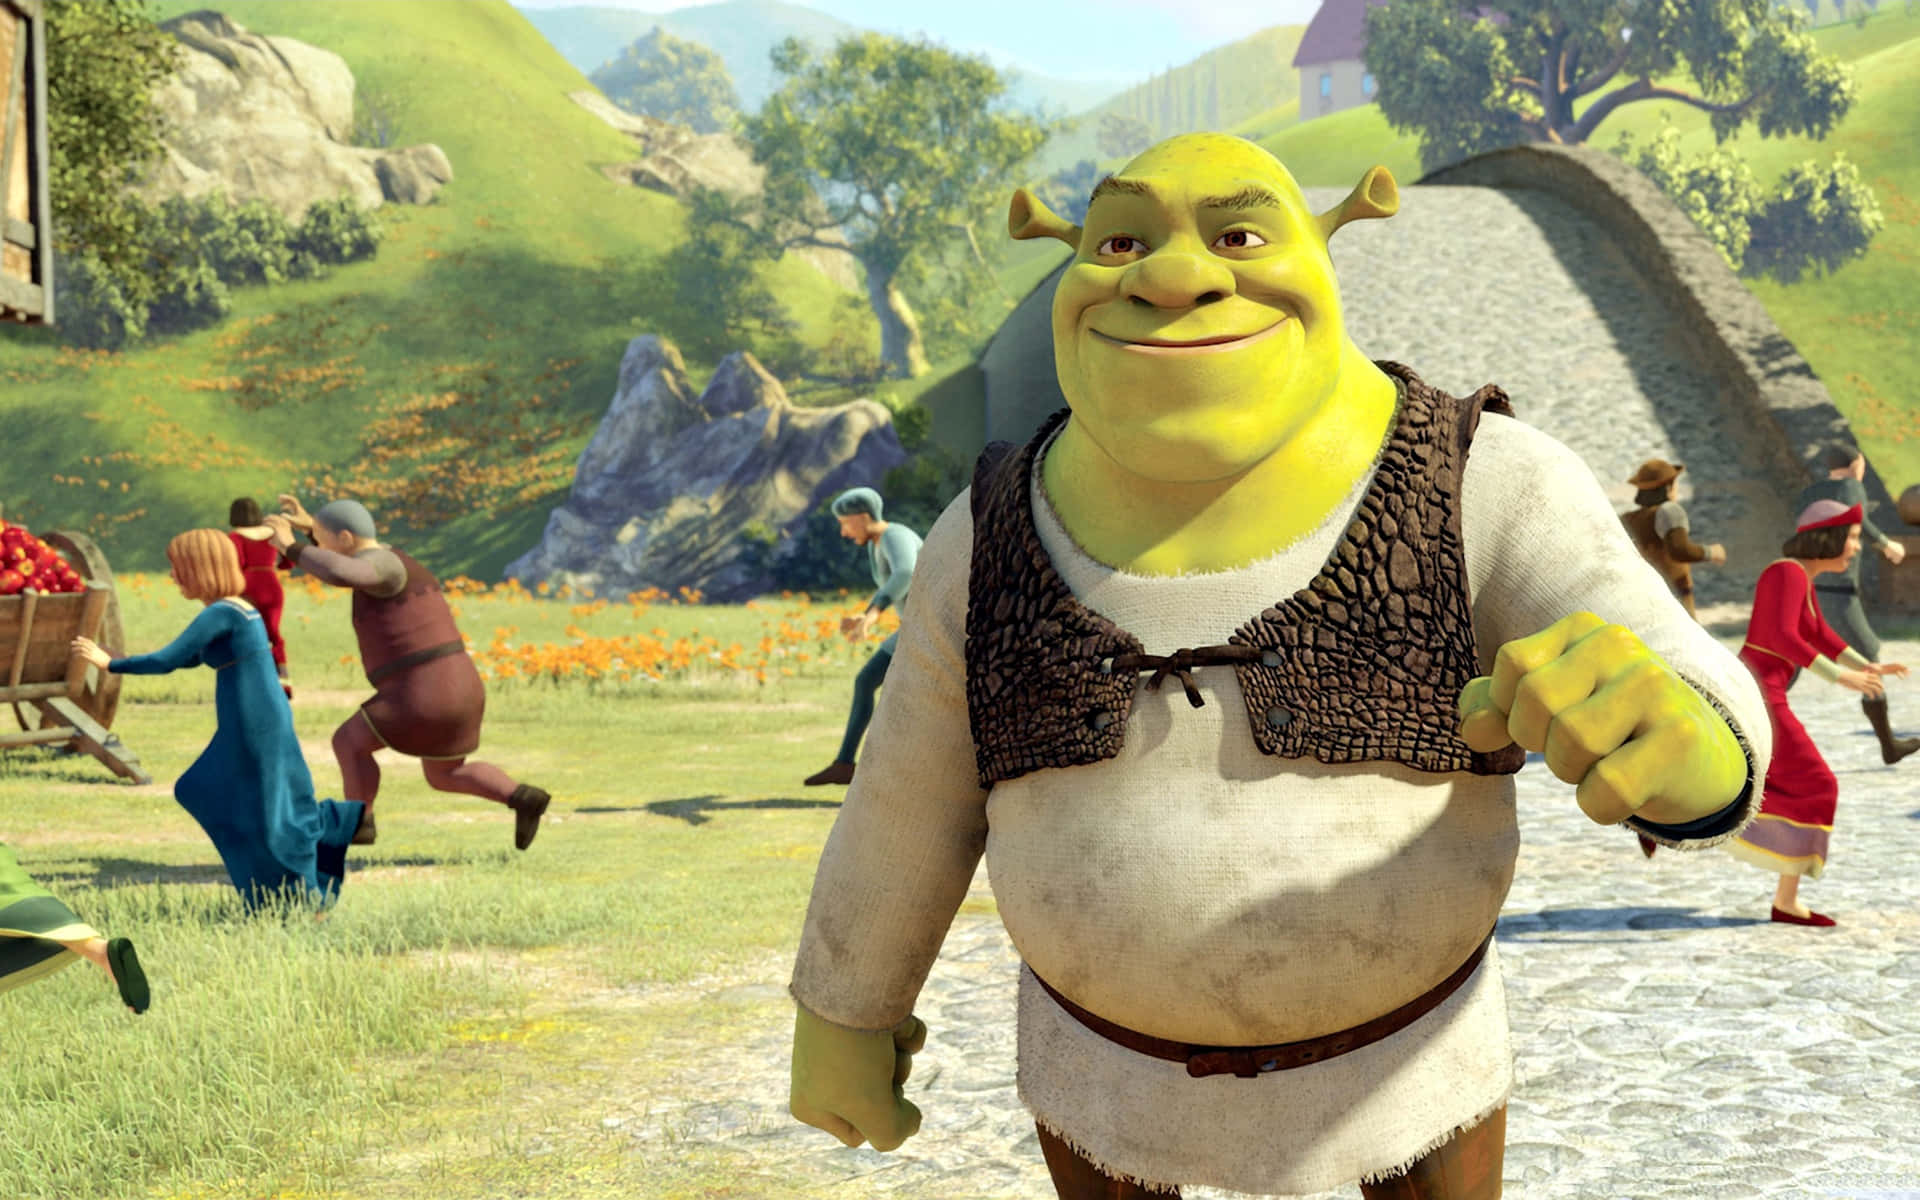 Join the lovable ogre Shrek, his loyal sidekick Donkey, and all their friends in the swampy fun-filled adventures!